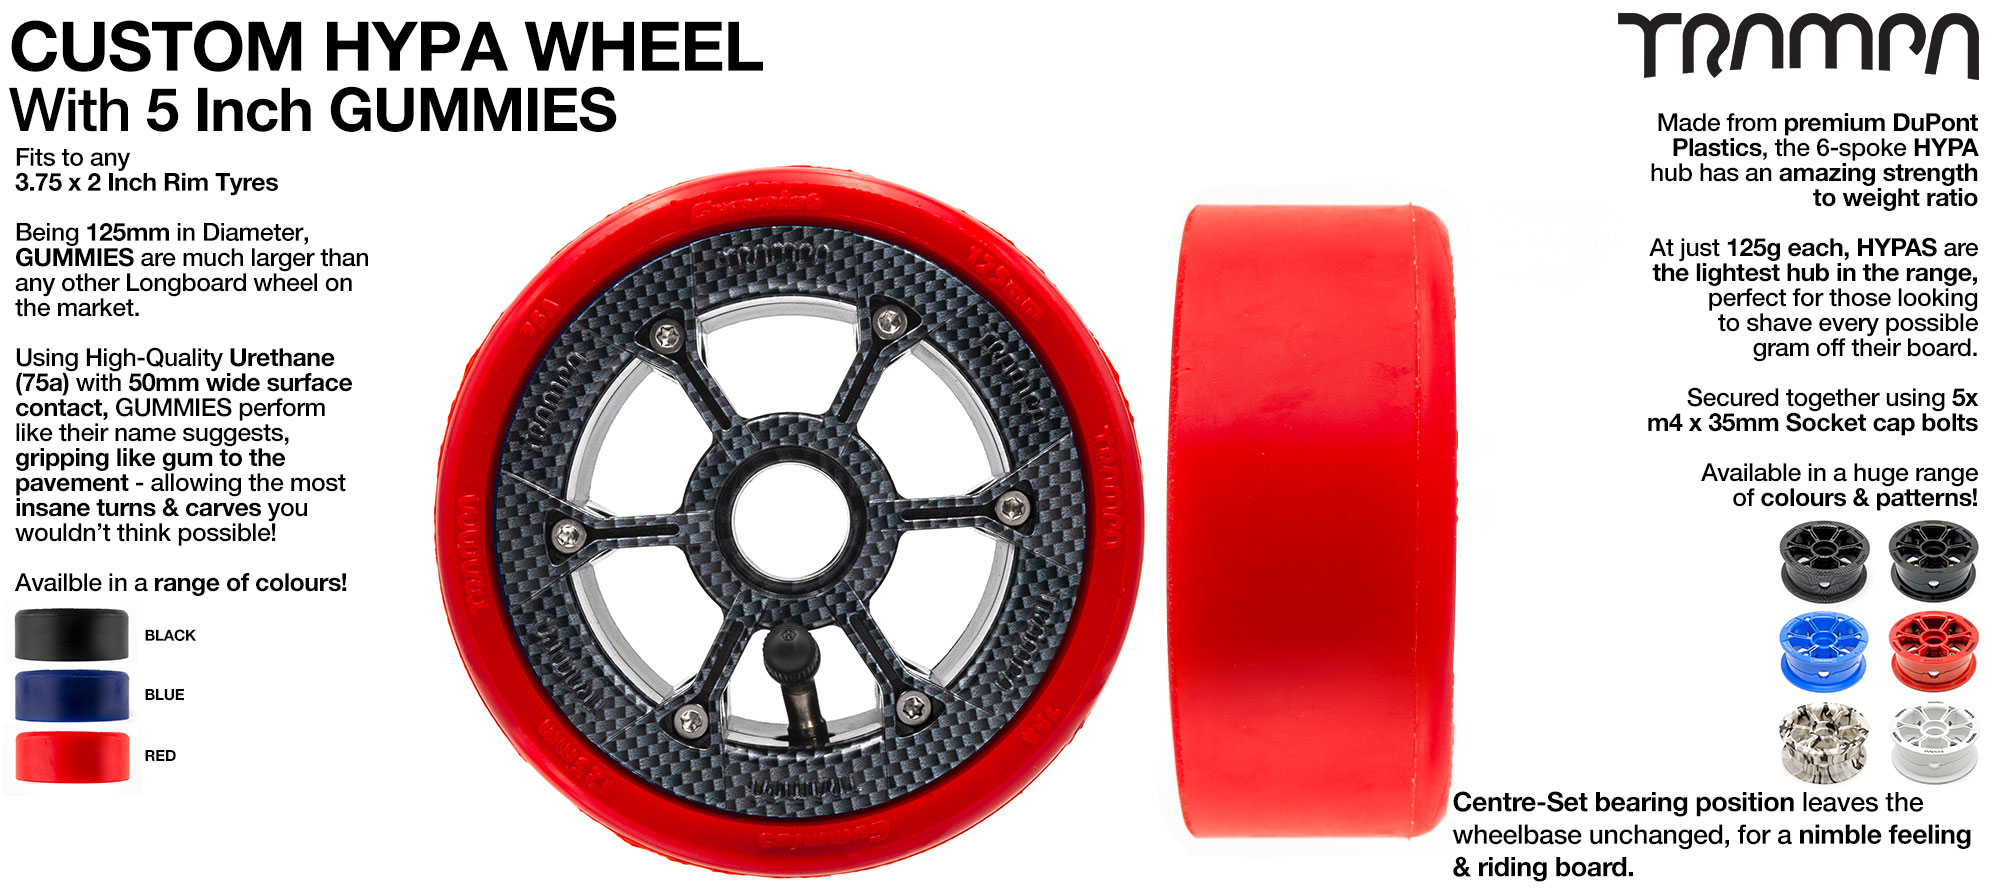 HYPA WHEELS Showing with 5 Inch GUMMIES